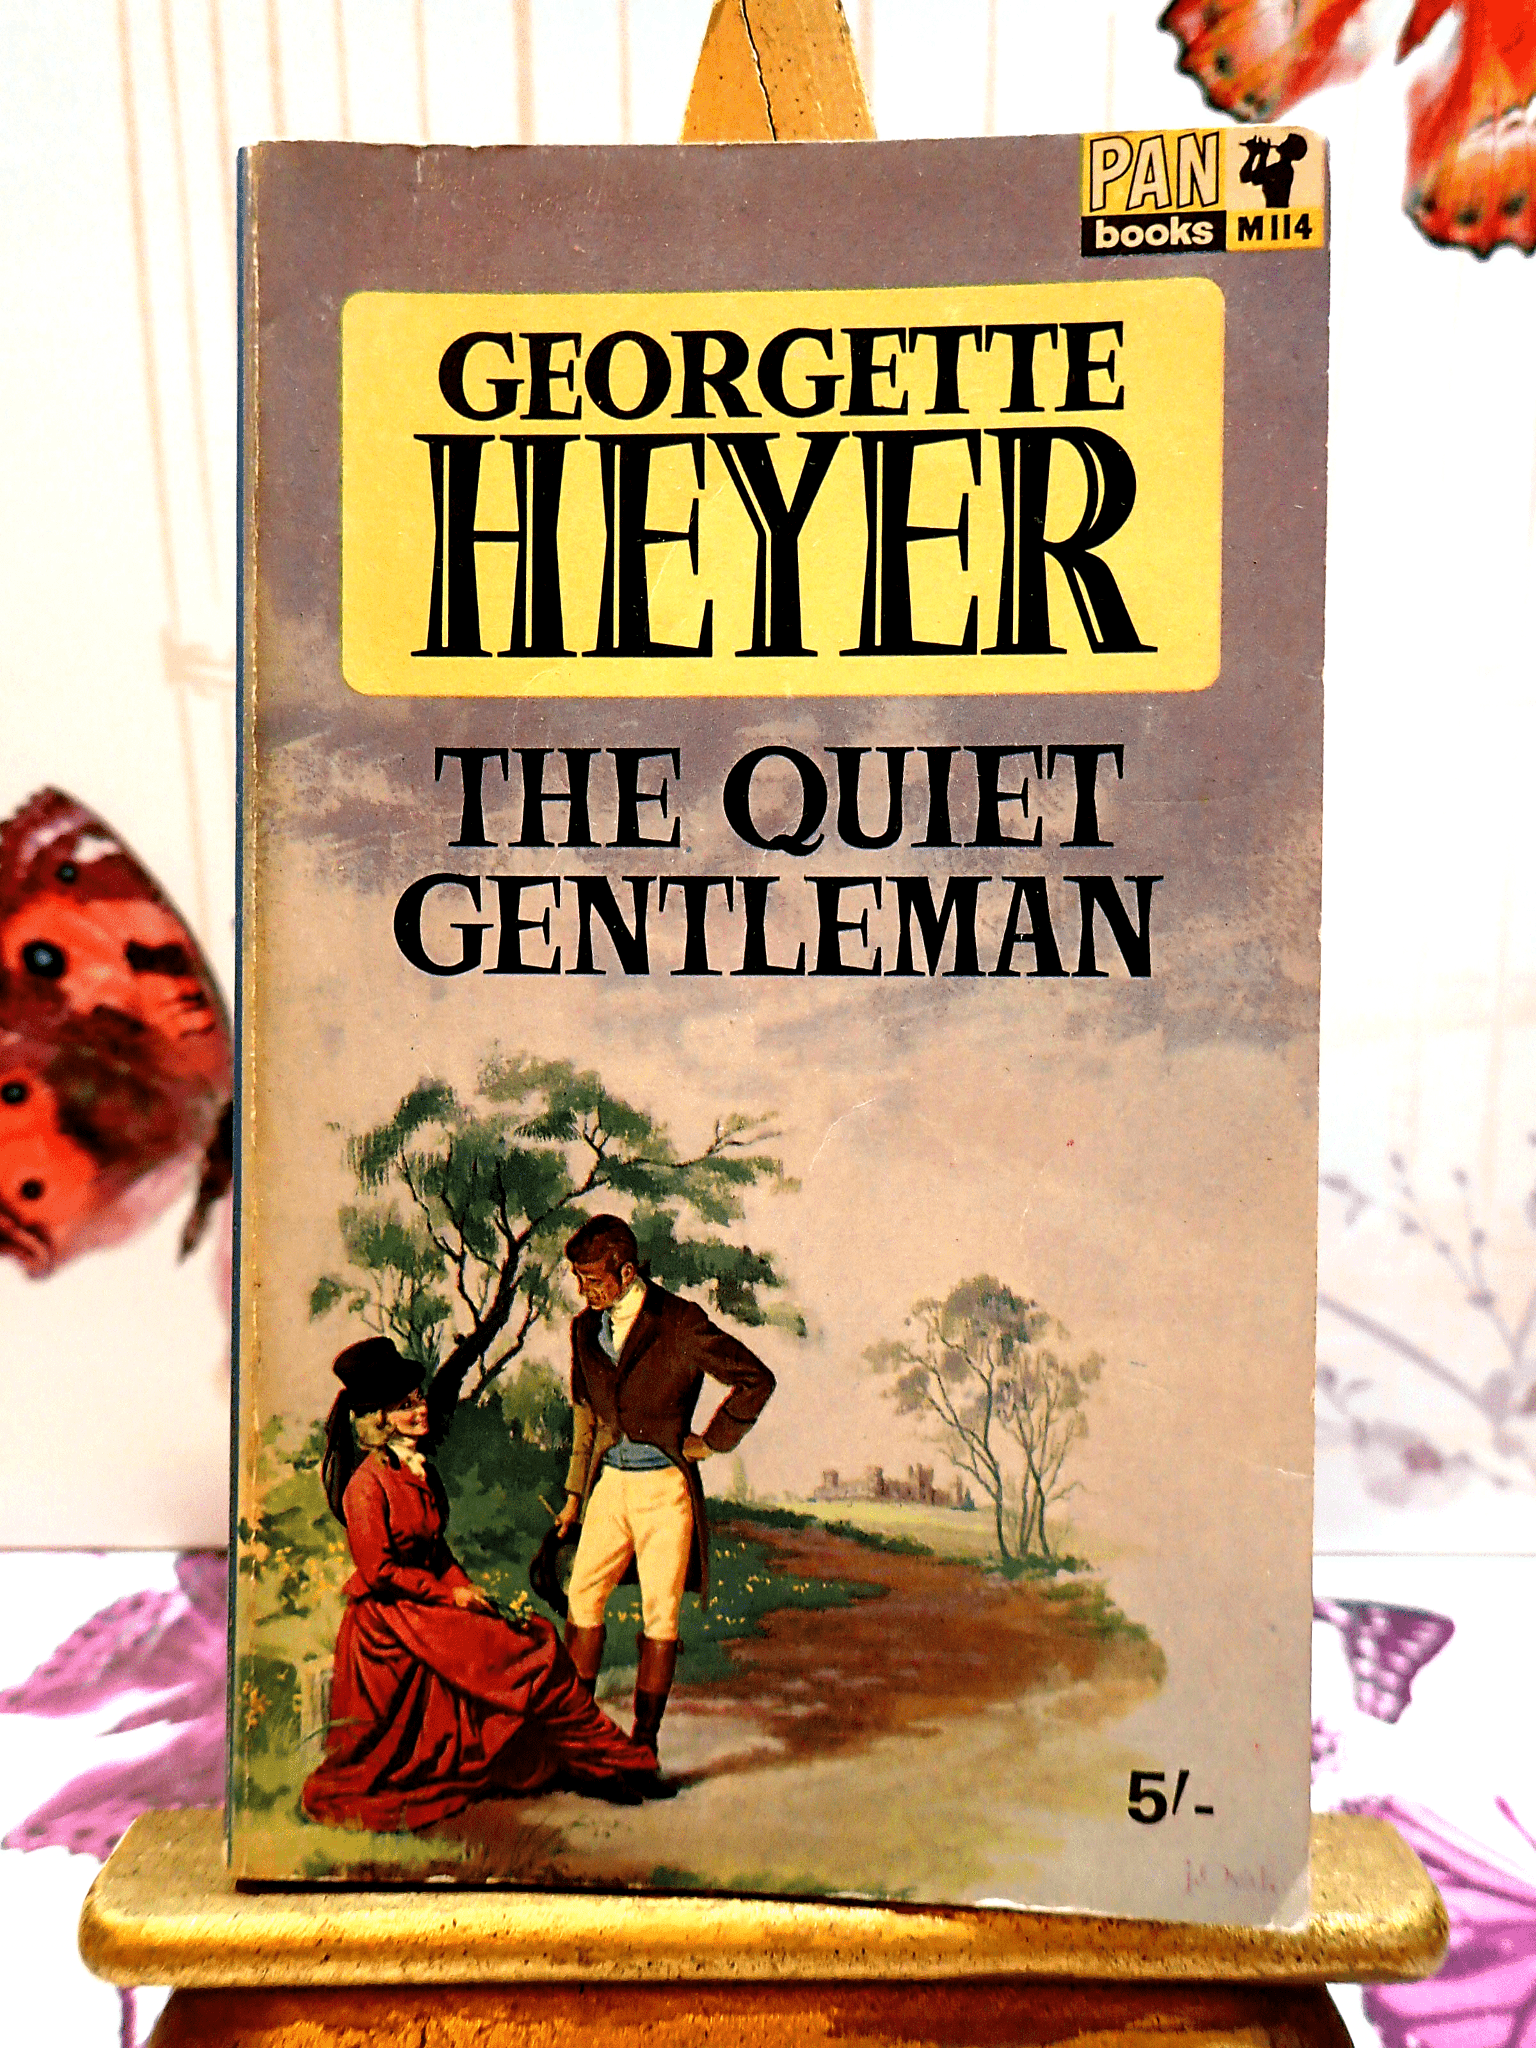 These Old Shades, Georgette Heyer, Book Review, Classic Regency Romance